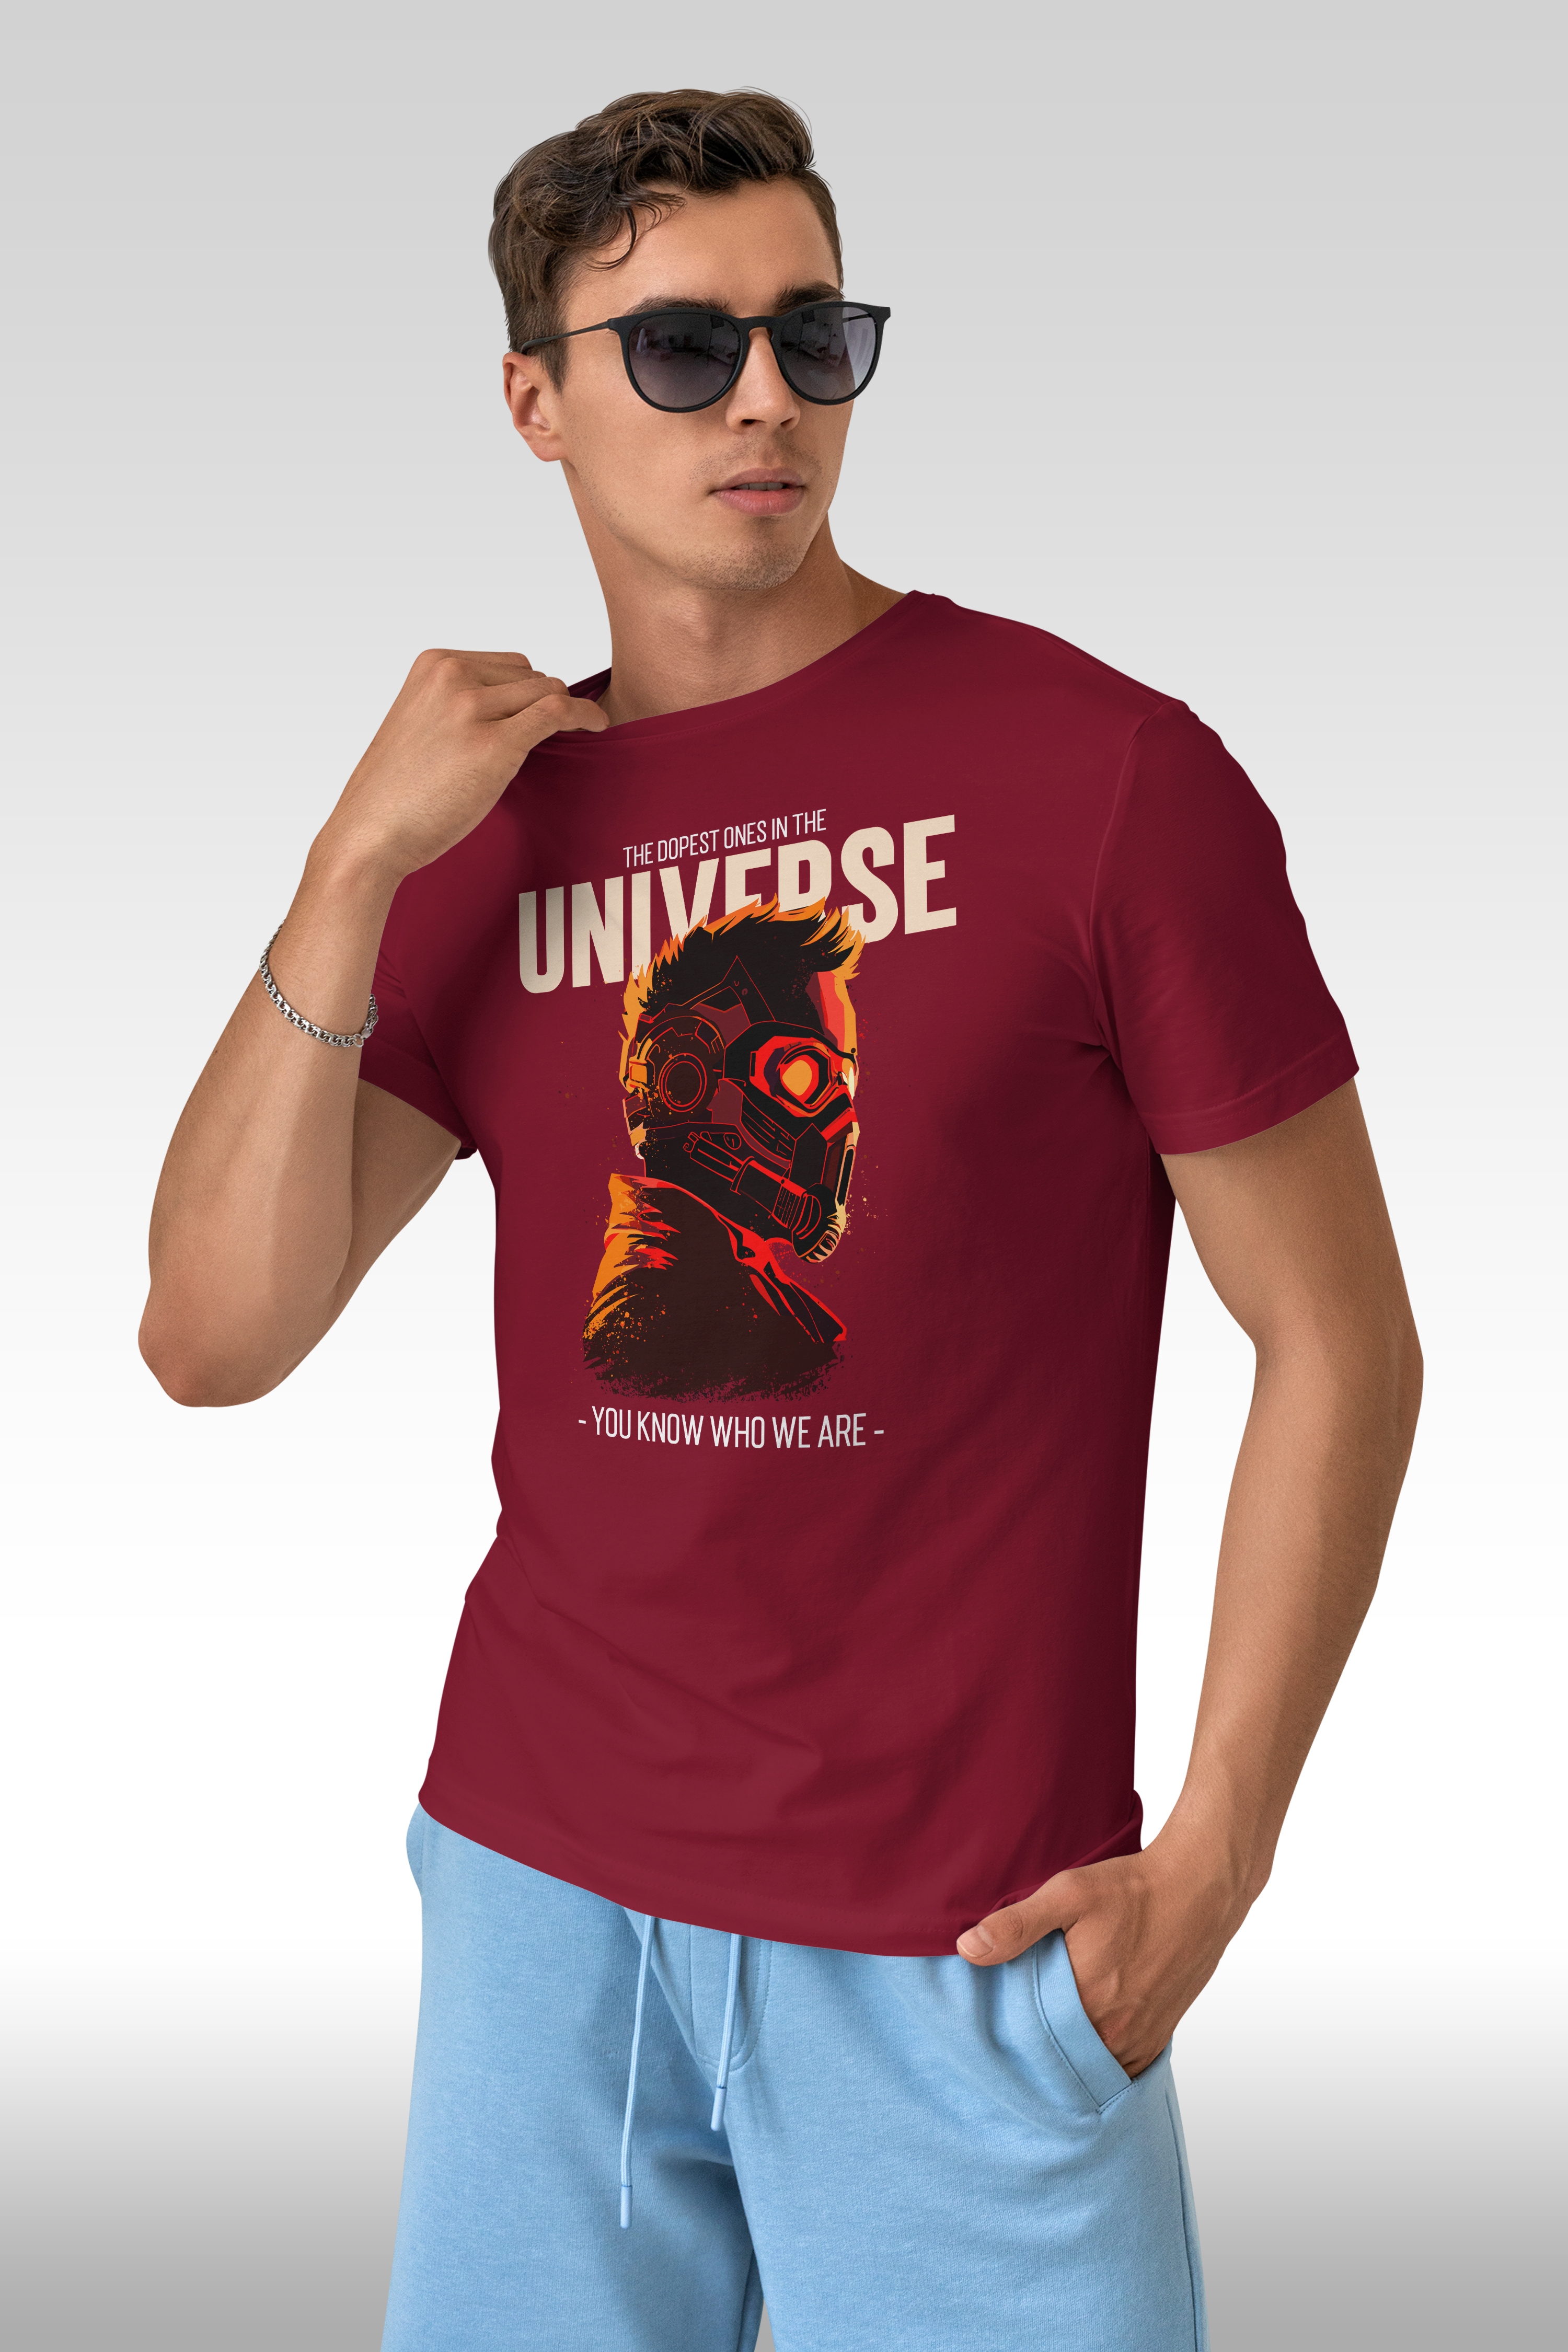 Starlord guardian of the galaxy Printed Half Sleeve Premium Cotton T-shirt For Men